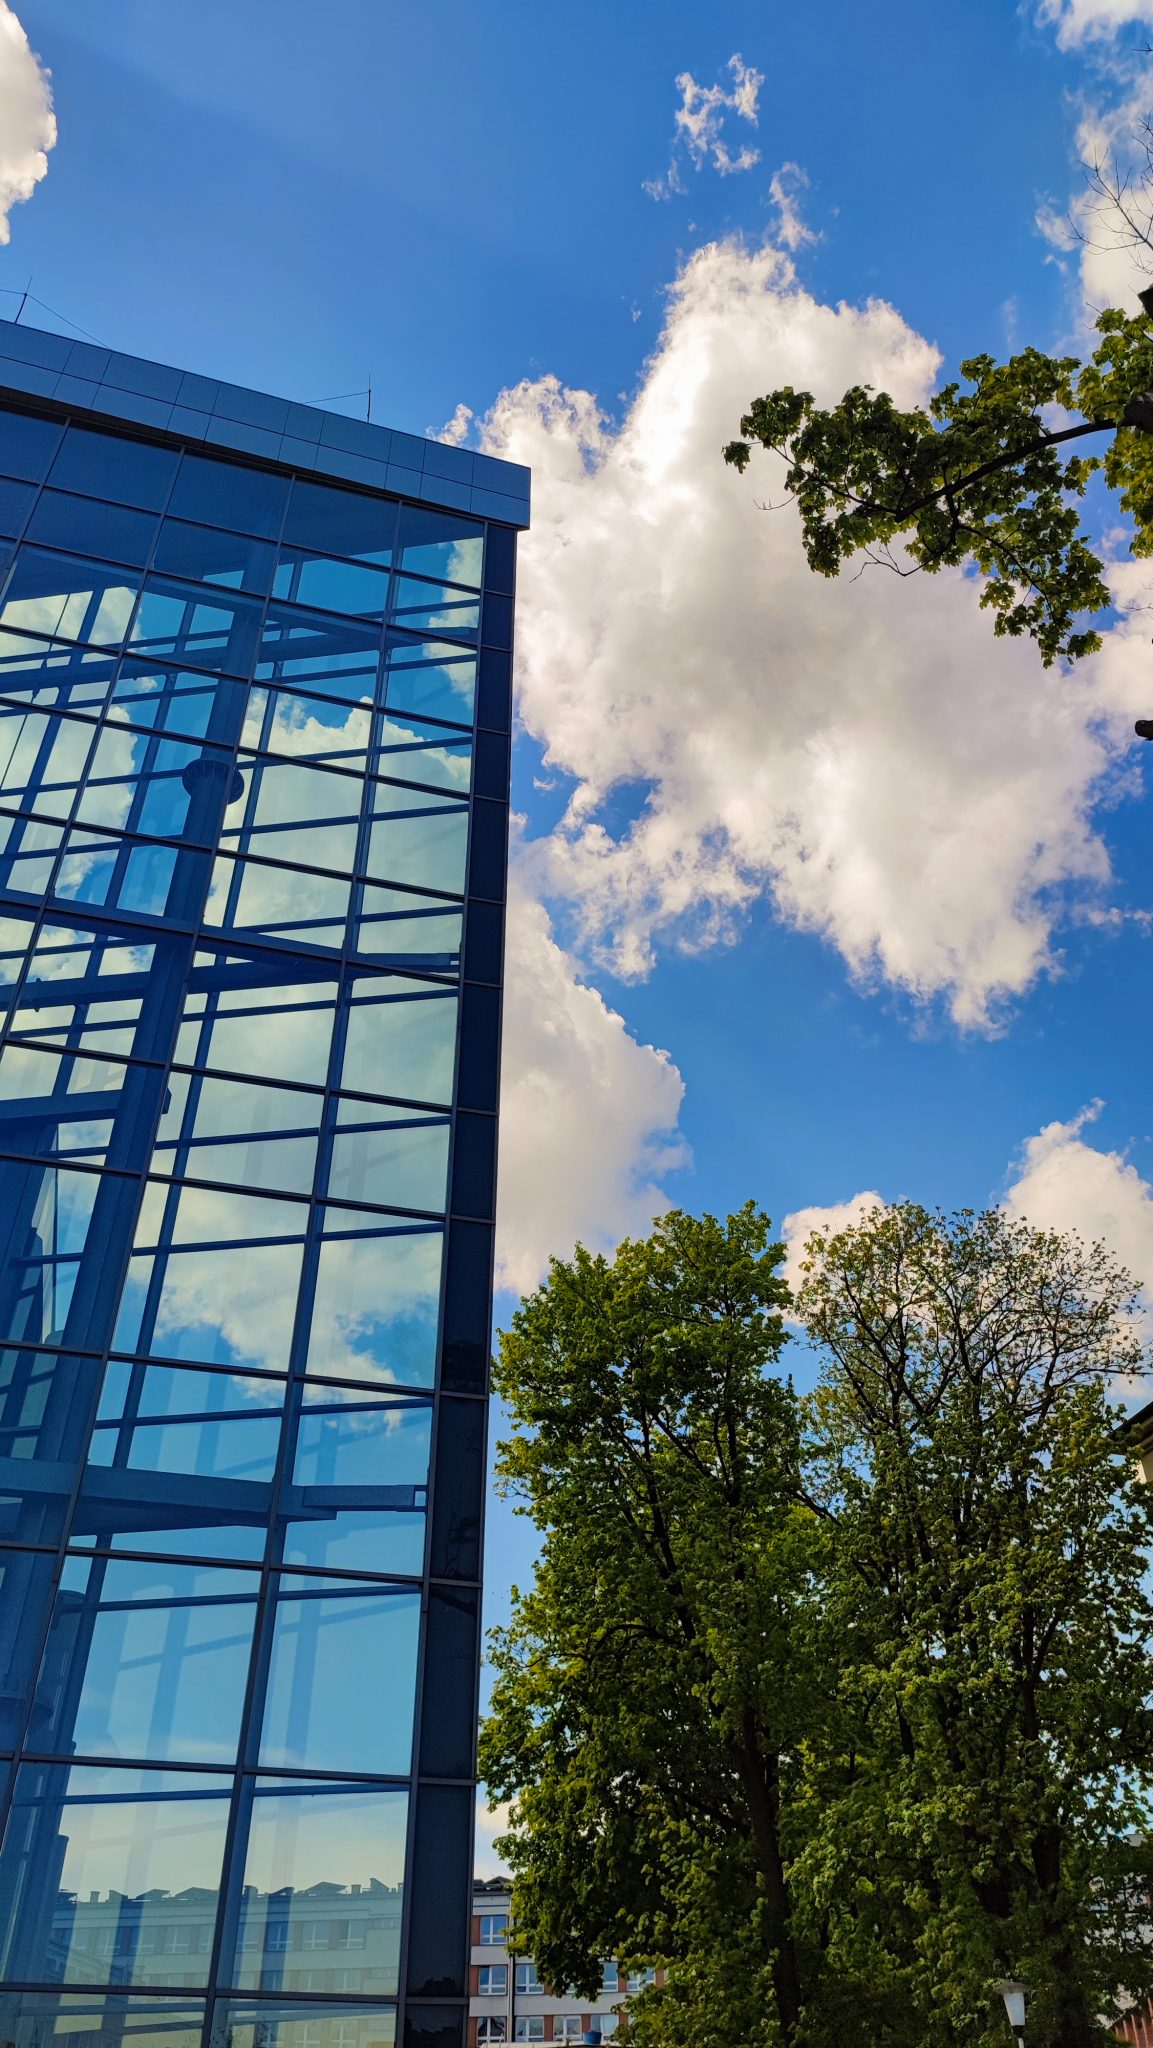 Modern architecture in Gliwice, Poland. Glass and steel building, green trees and blue sky with clouds.